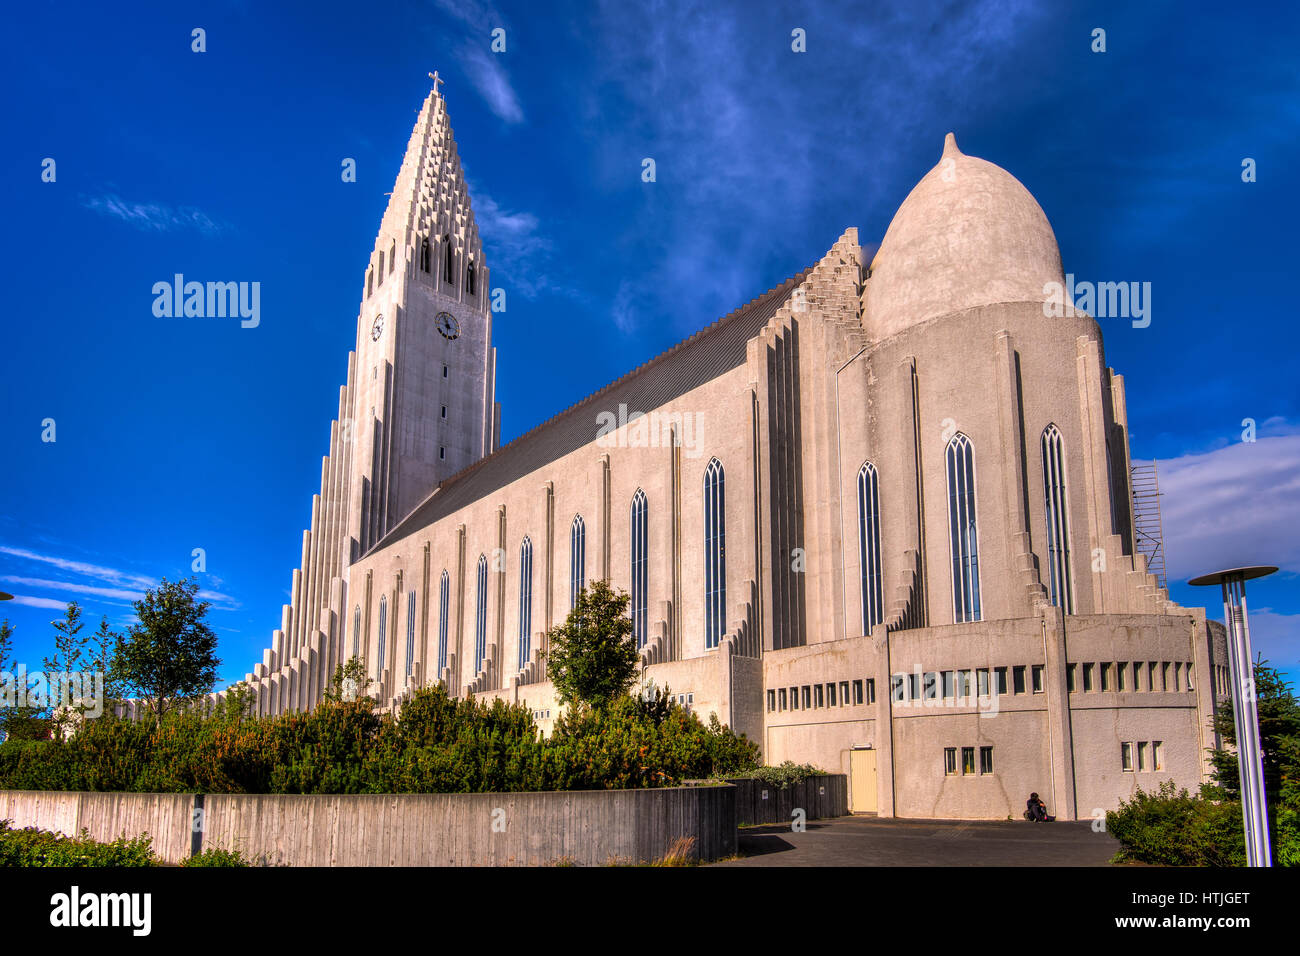 The unique and futuristic looking Hallgrímskirkja Church in Iceland. Stock Photo